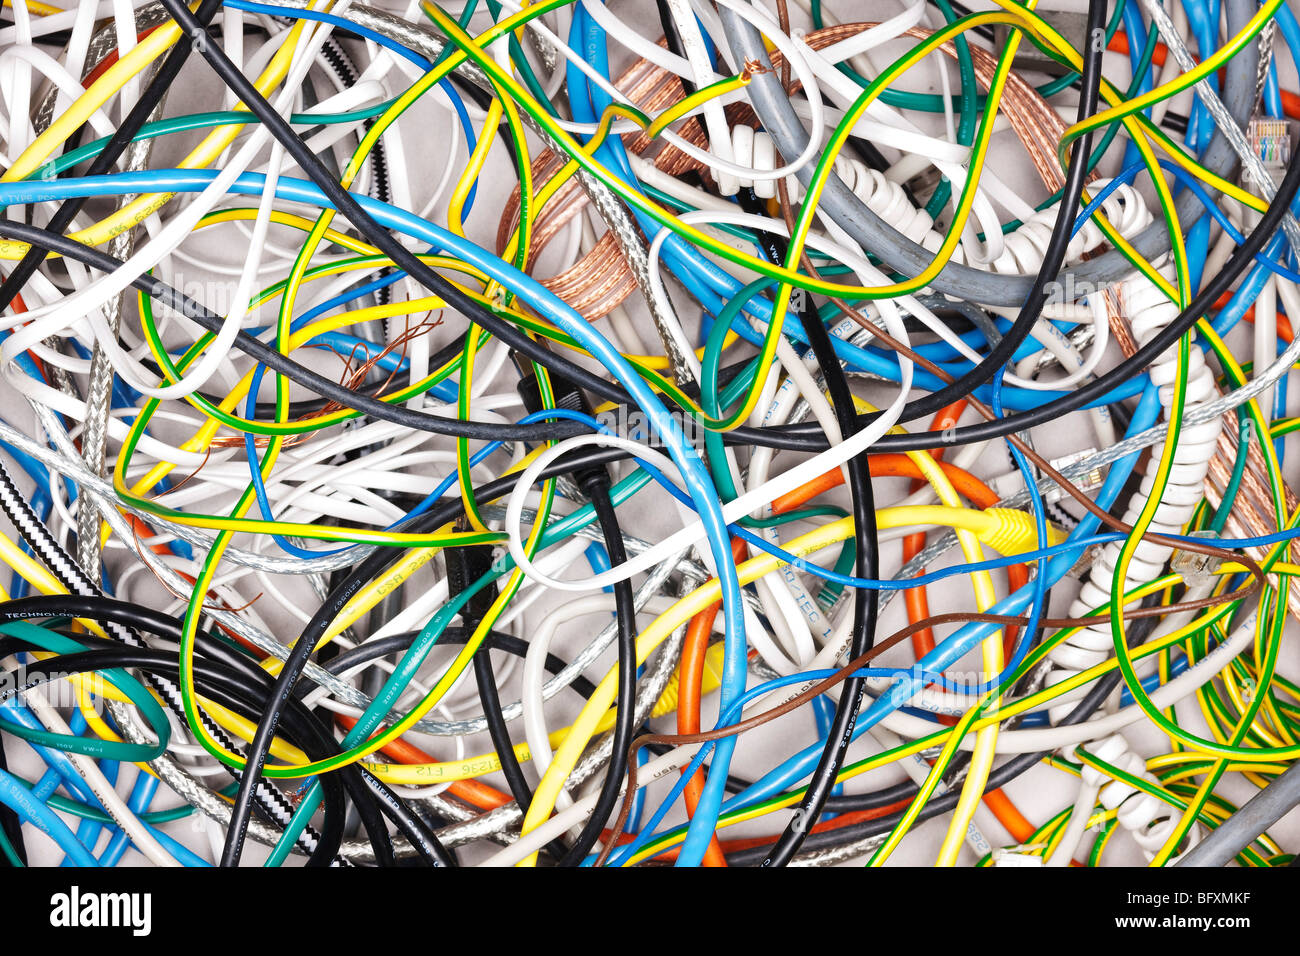 A tangle of colored wires on the ground Stock Photo